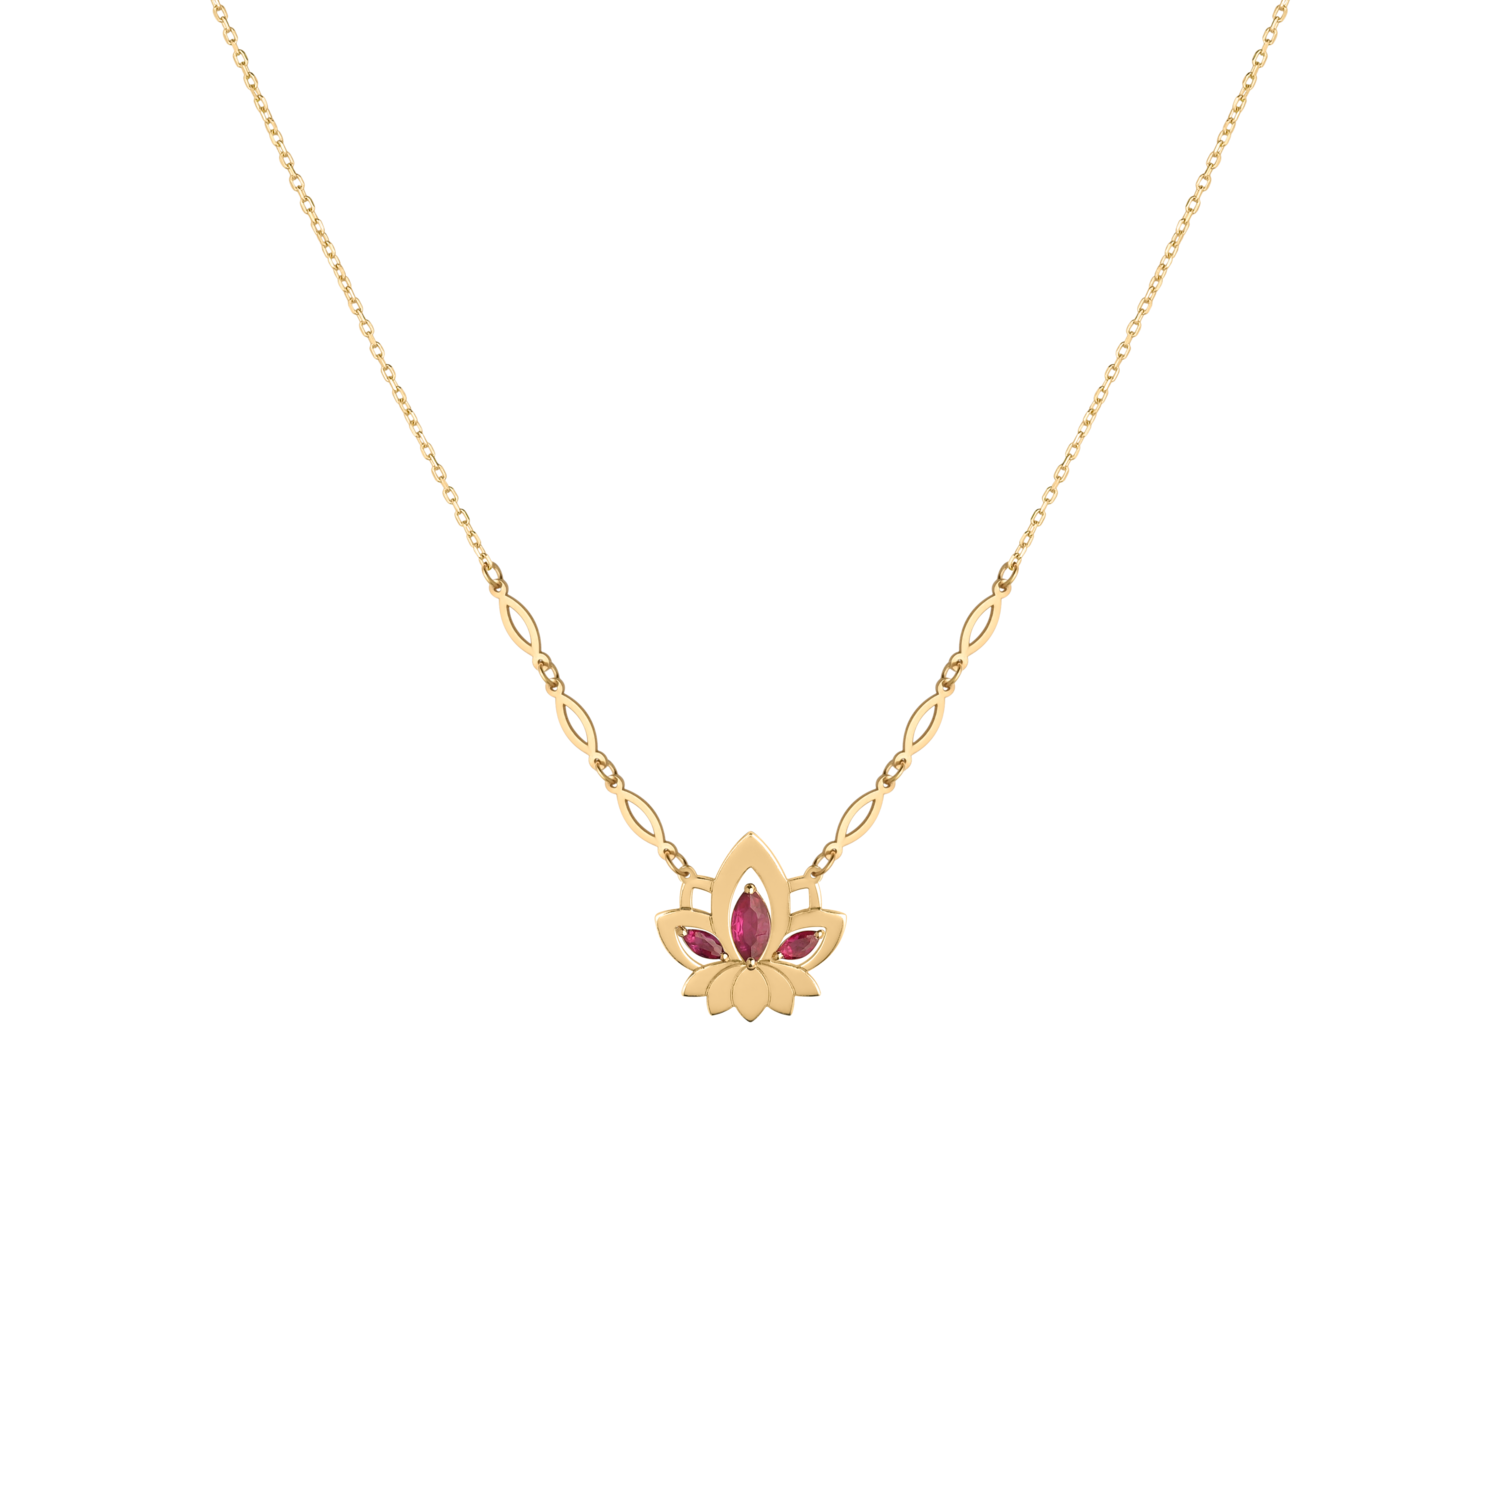 Lotus Gold Necklace with Colored Stones